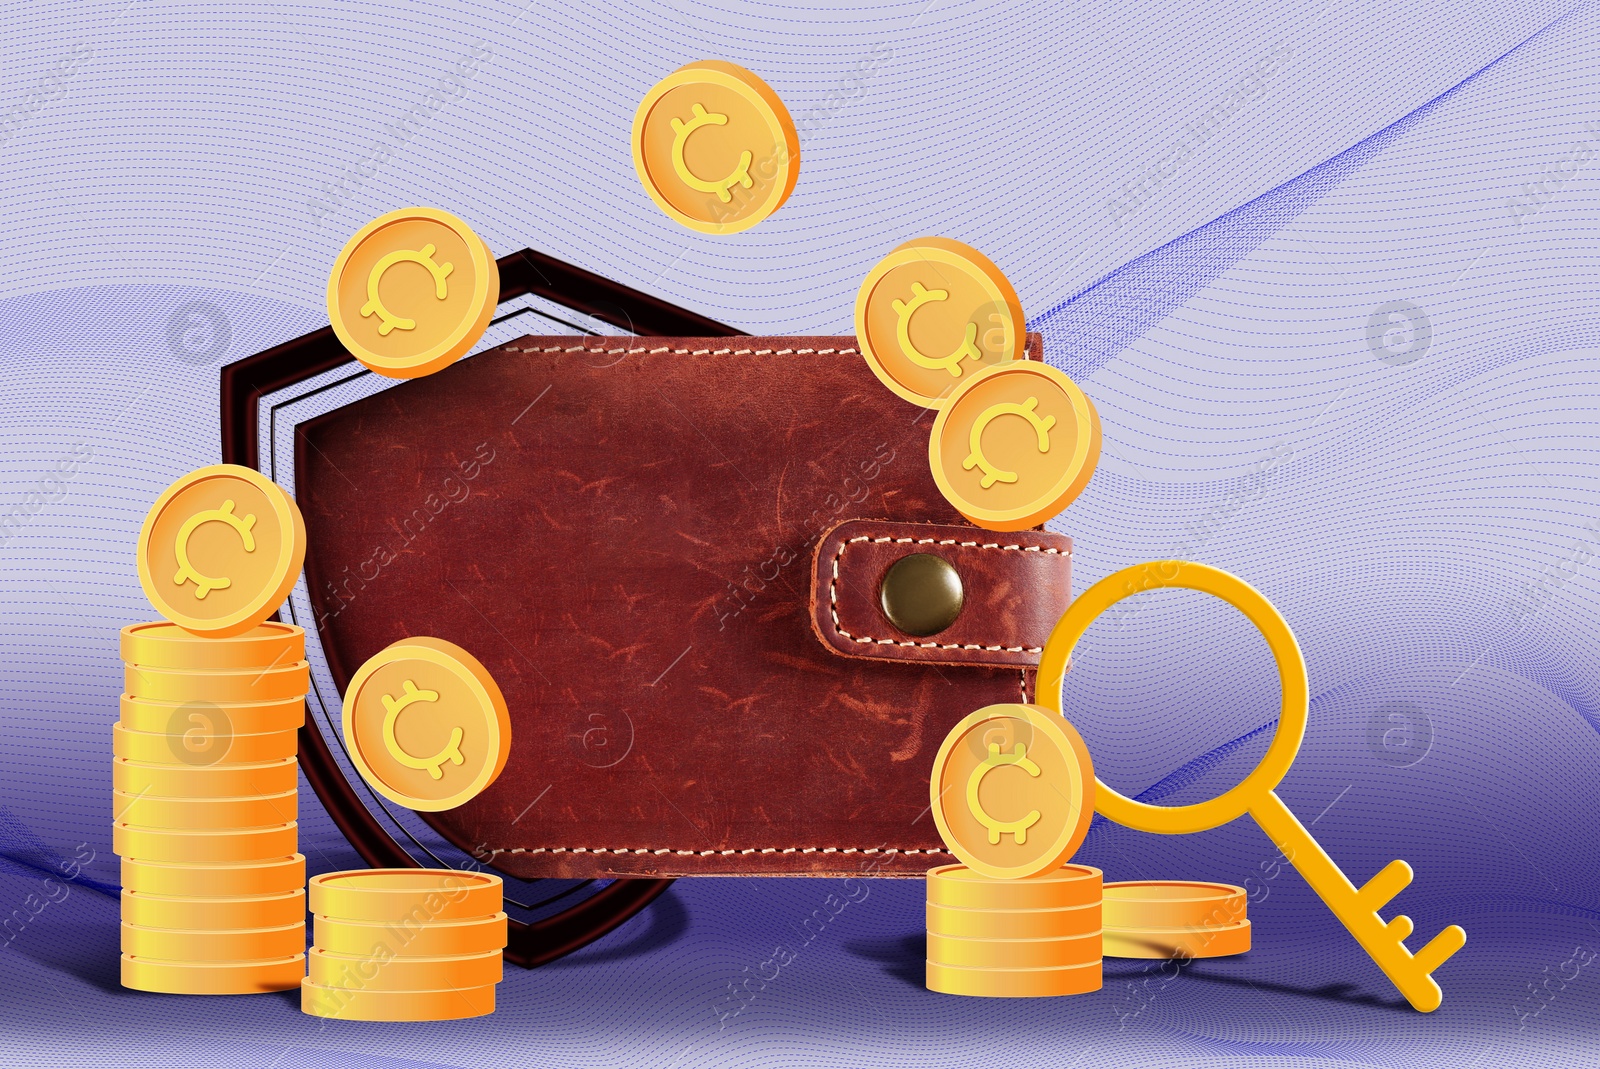 Illustration of Security of cryptocurrency. Wallet sticking out of shield shape hole, coins and key on color background